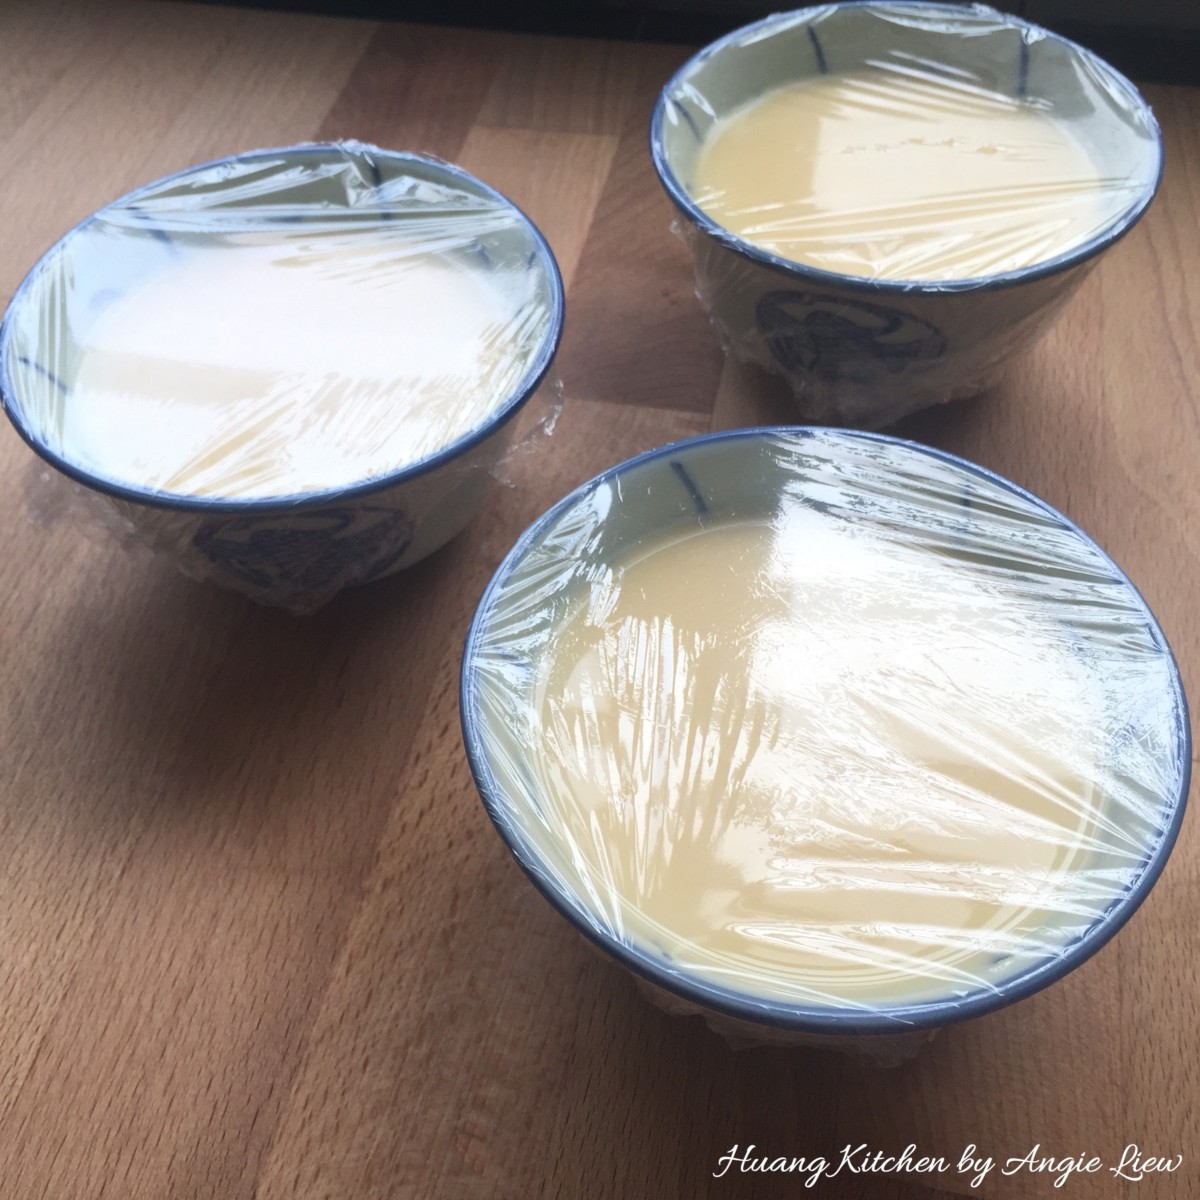 Steamed Egg Pudding Recipe - cover bowls with cling wrap before steaming